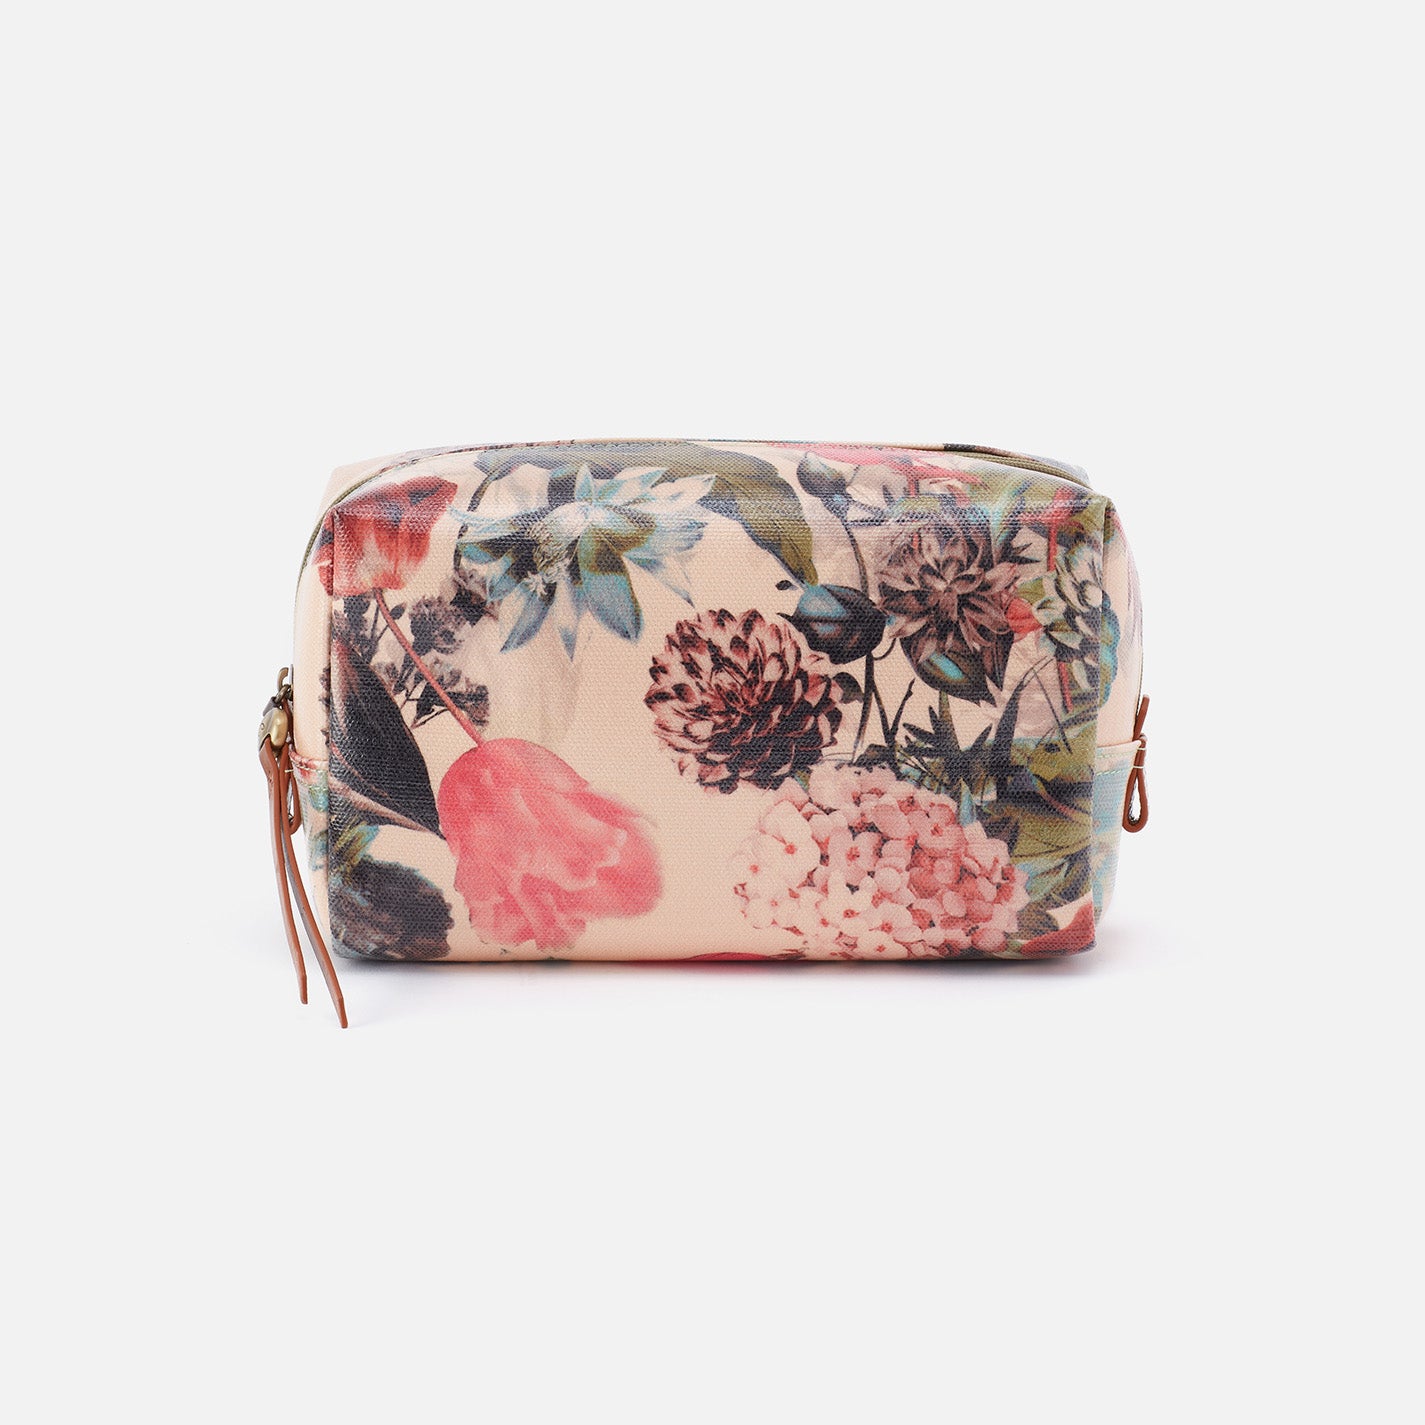 Cosmetic Bag Small Pouch Pencil Case Black with Pink Flowers Floral Pr